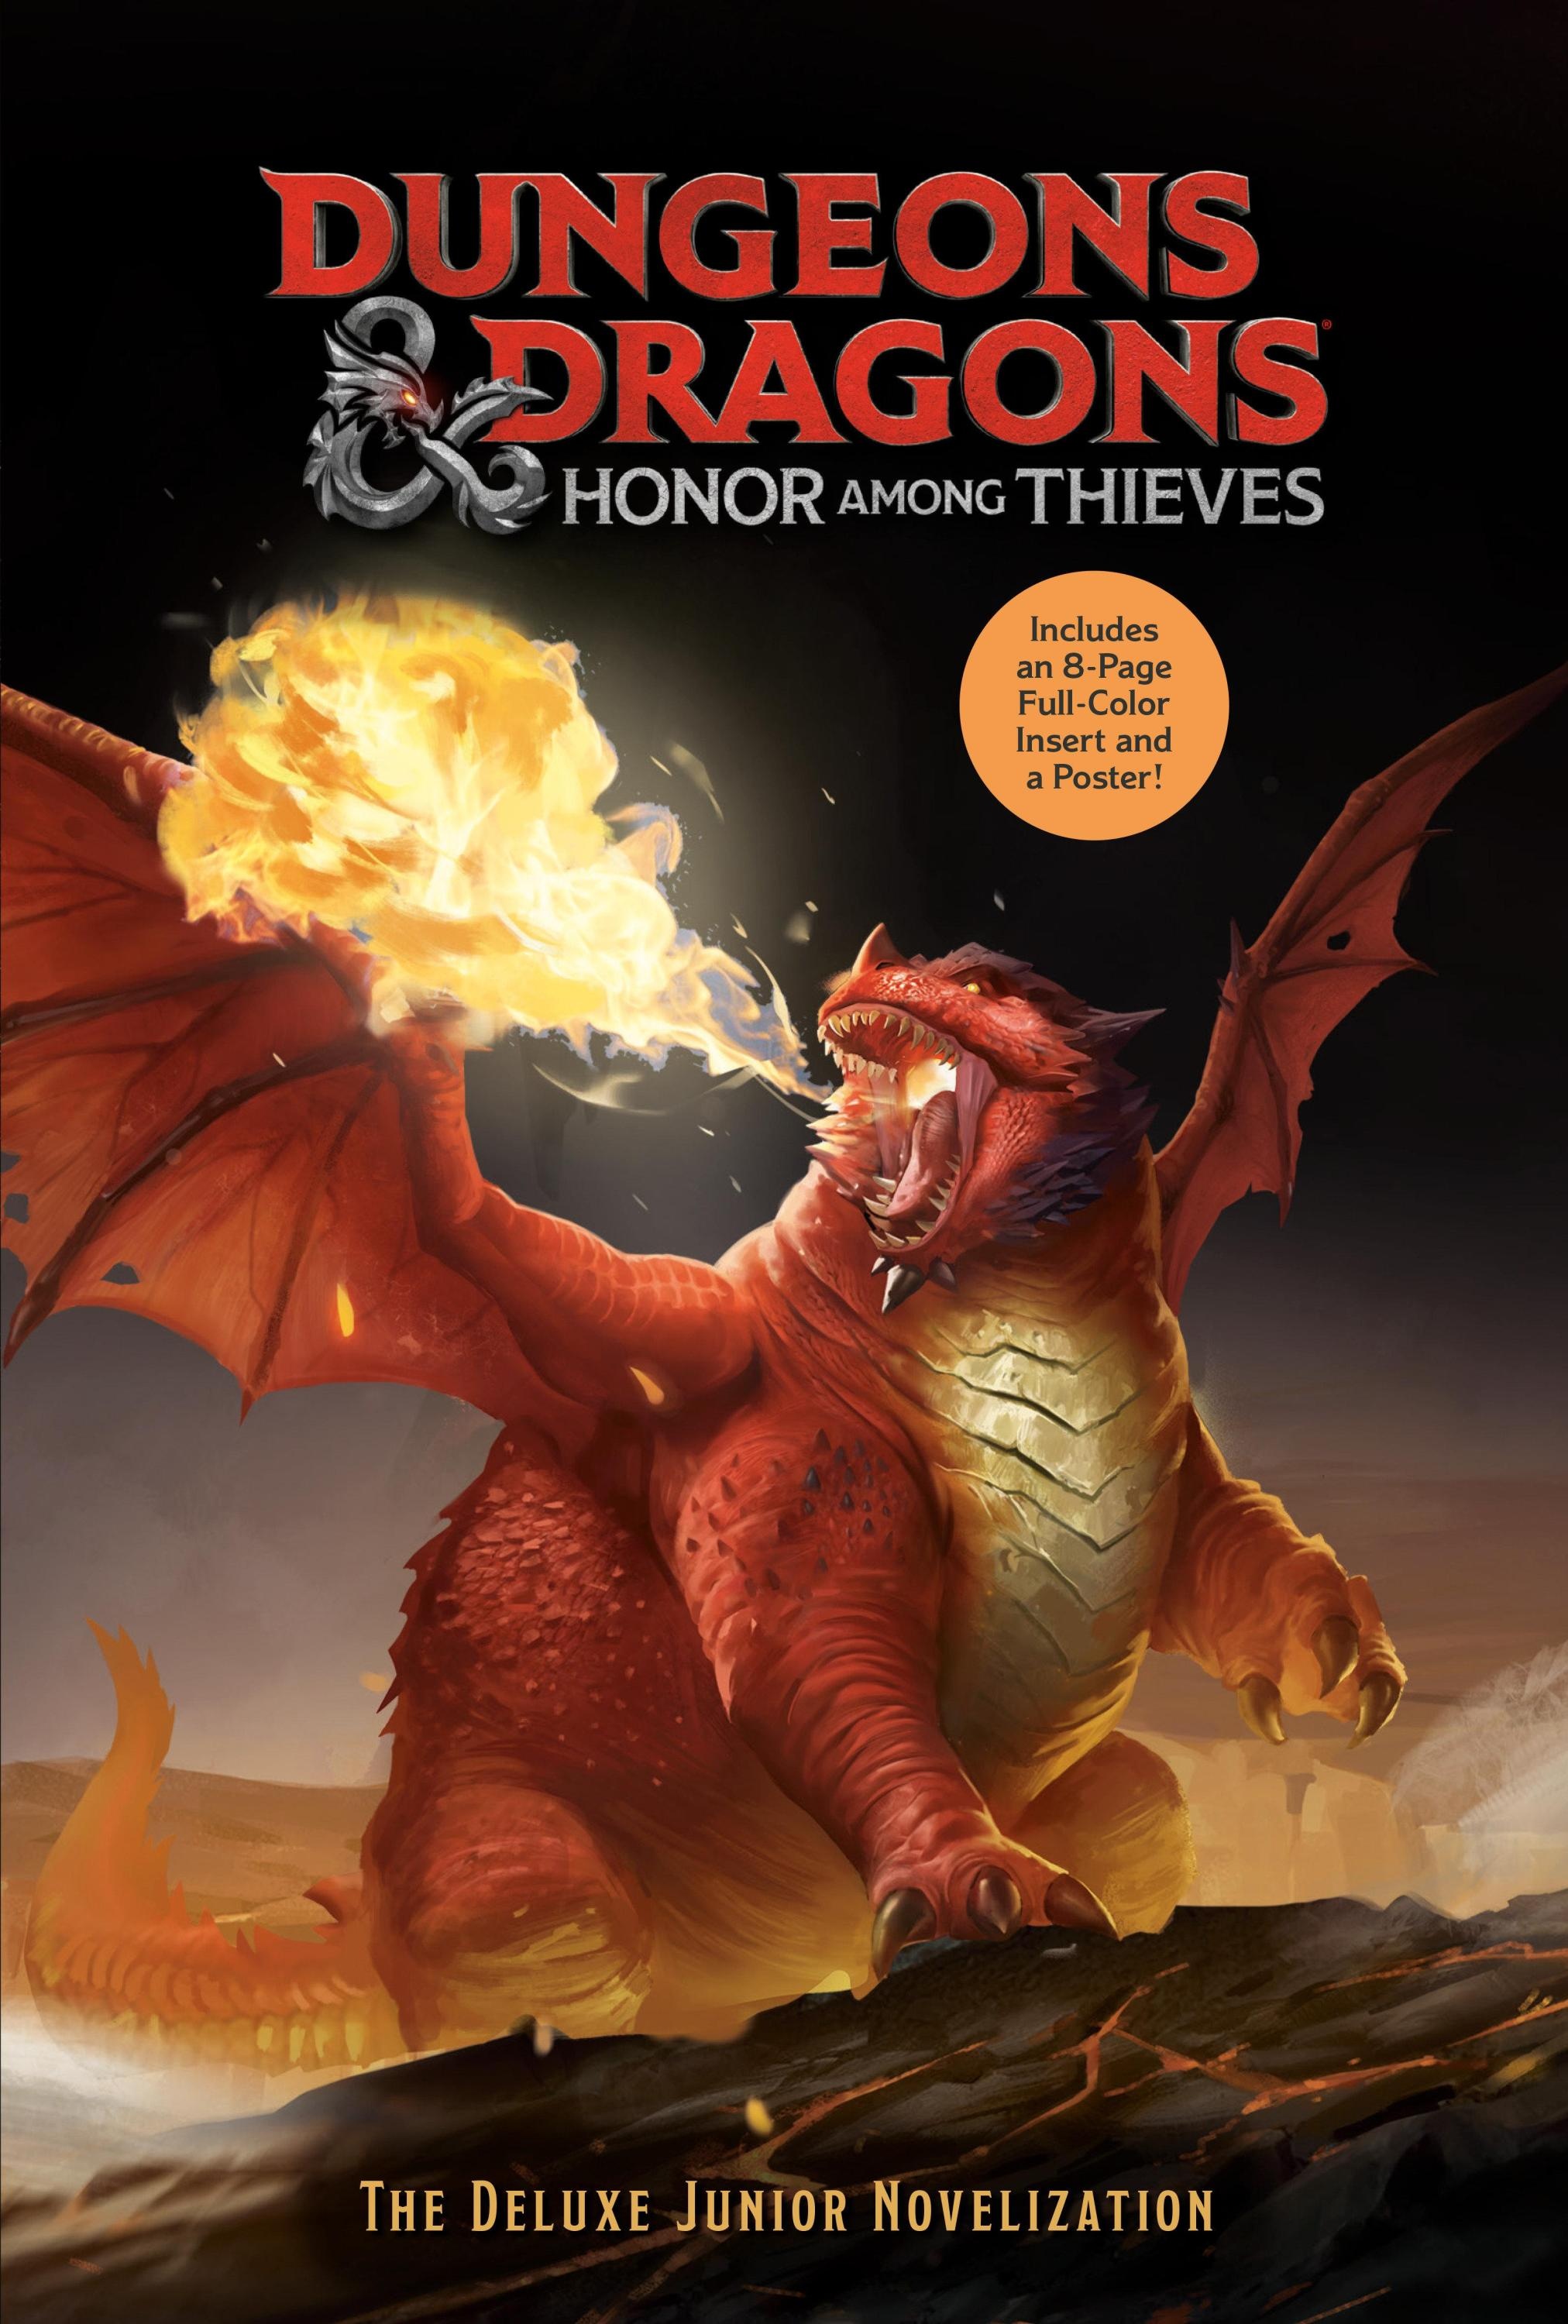 Dungeons & Dragons: Honor Among Thieves: The Deluxe Junior Novelization (Dungeons & Dragons: Honor Among Thieves) - David Lewman  Gebunden